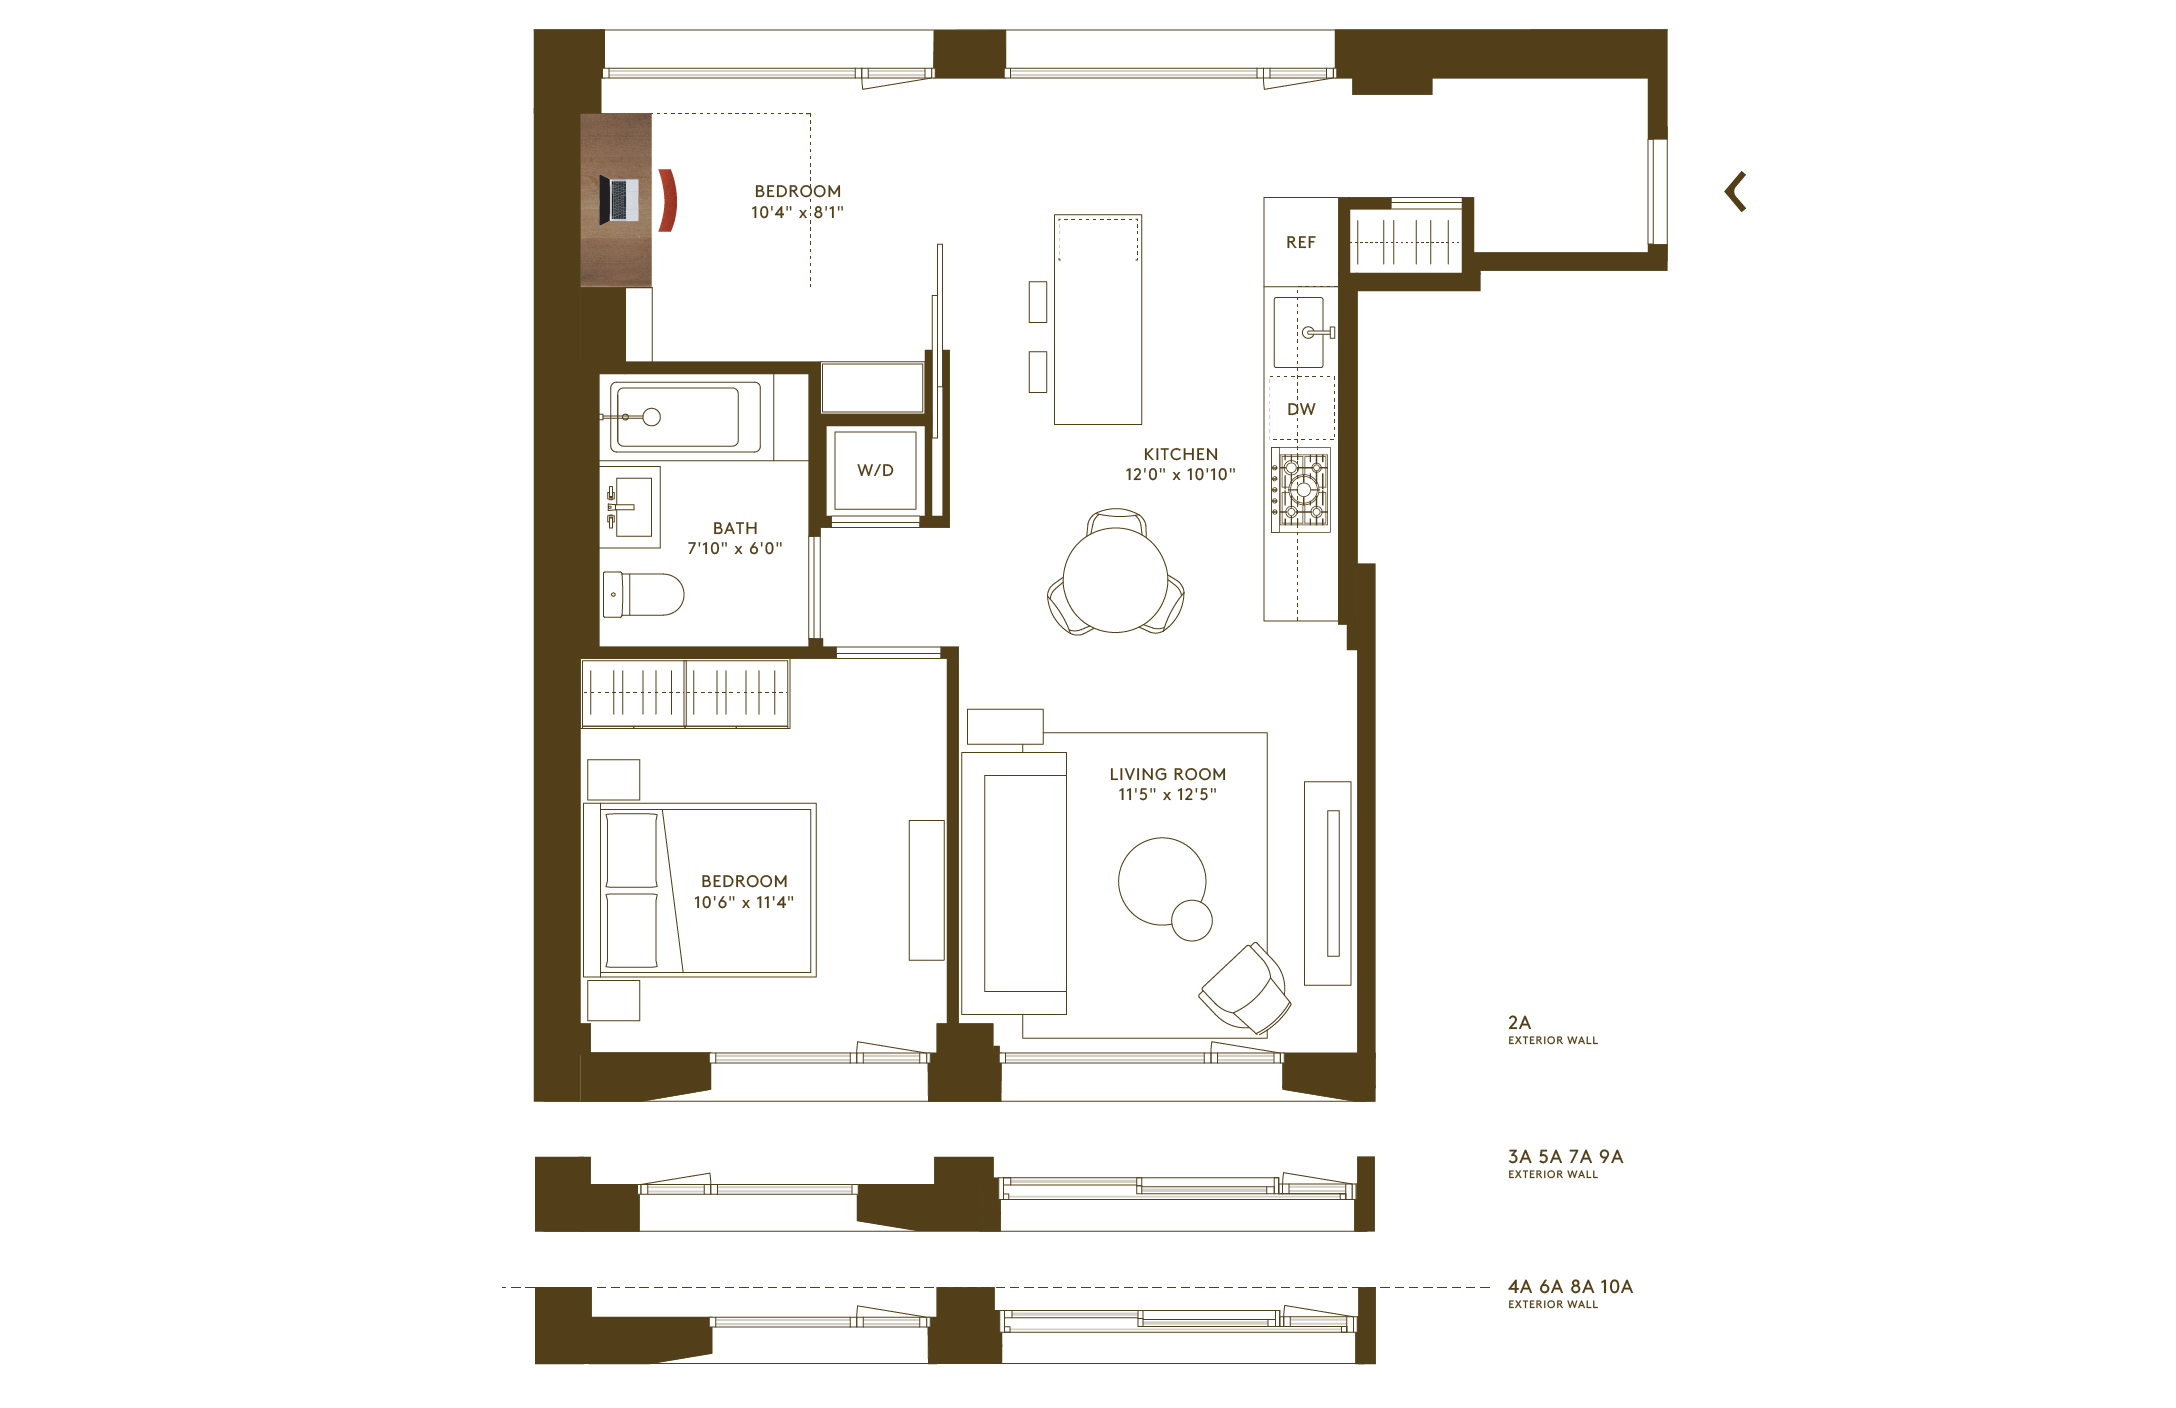 Two bedroom condo floorplan with home office space at Hendrix House NYC condos in Kips Bay.